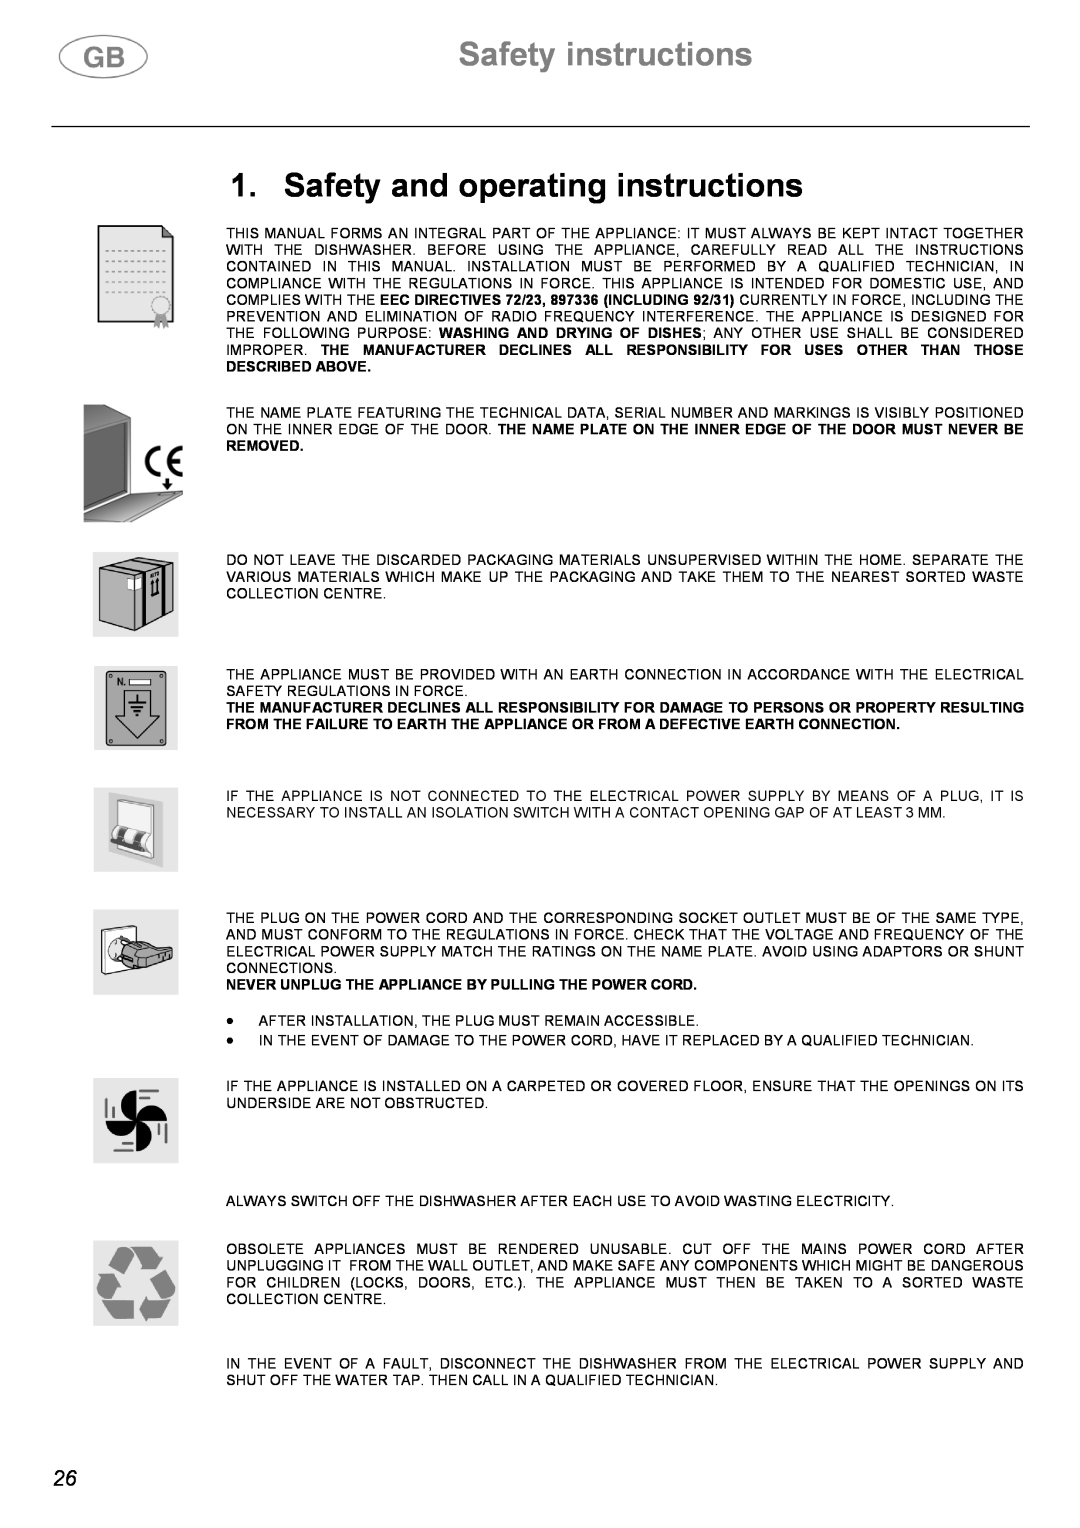 Smeg CA01-1 instruction manual Safety instructions, Safety and operating instructions, Described Above, Removed 